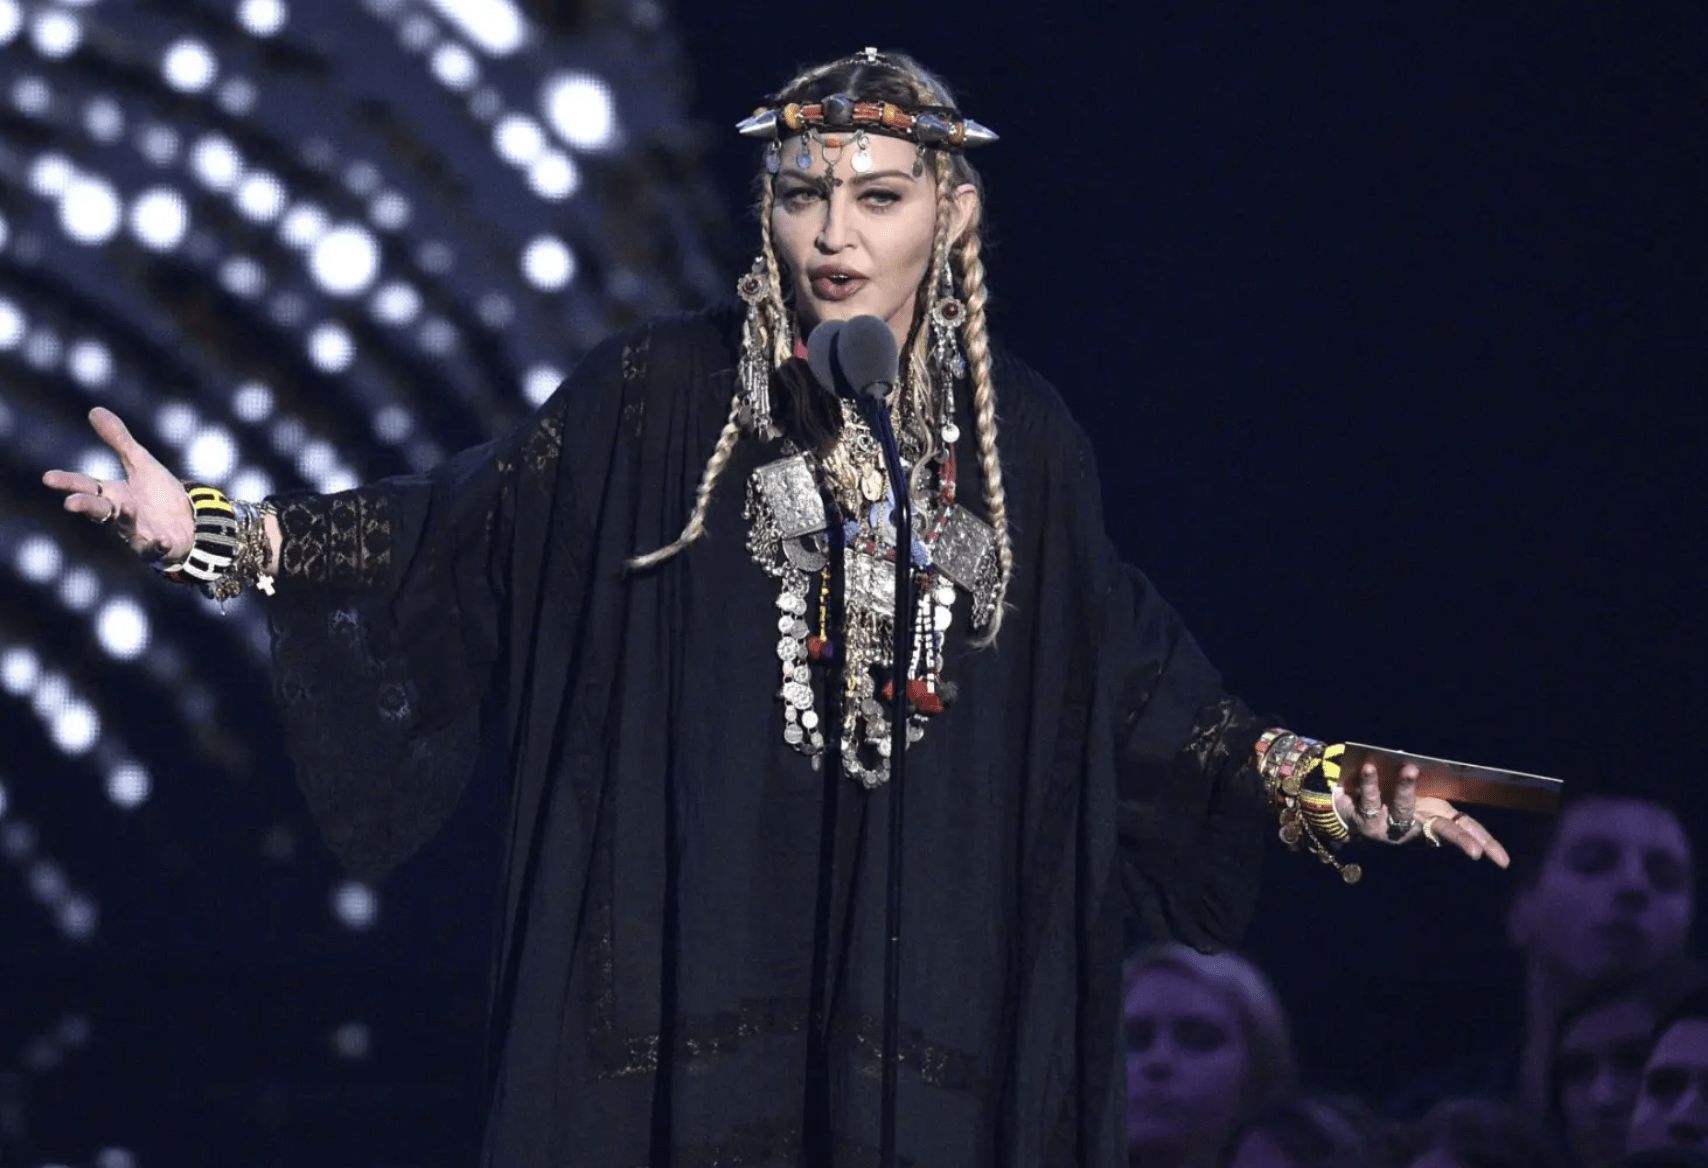 Madonna presents a tribute to Aretha Franklin at the MTV Video Music Awards at Radio City Music Hall in New York in 2018. (Chris Pizzello, Invision/AP)